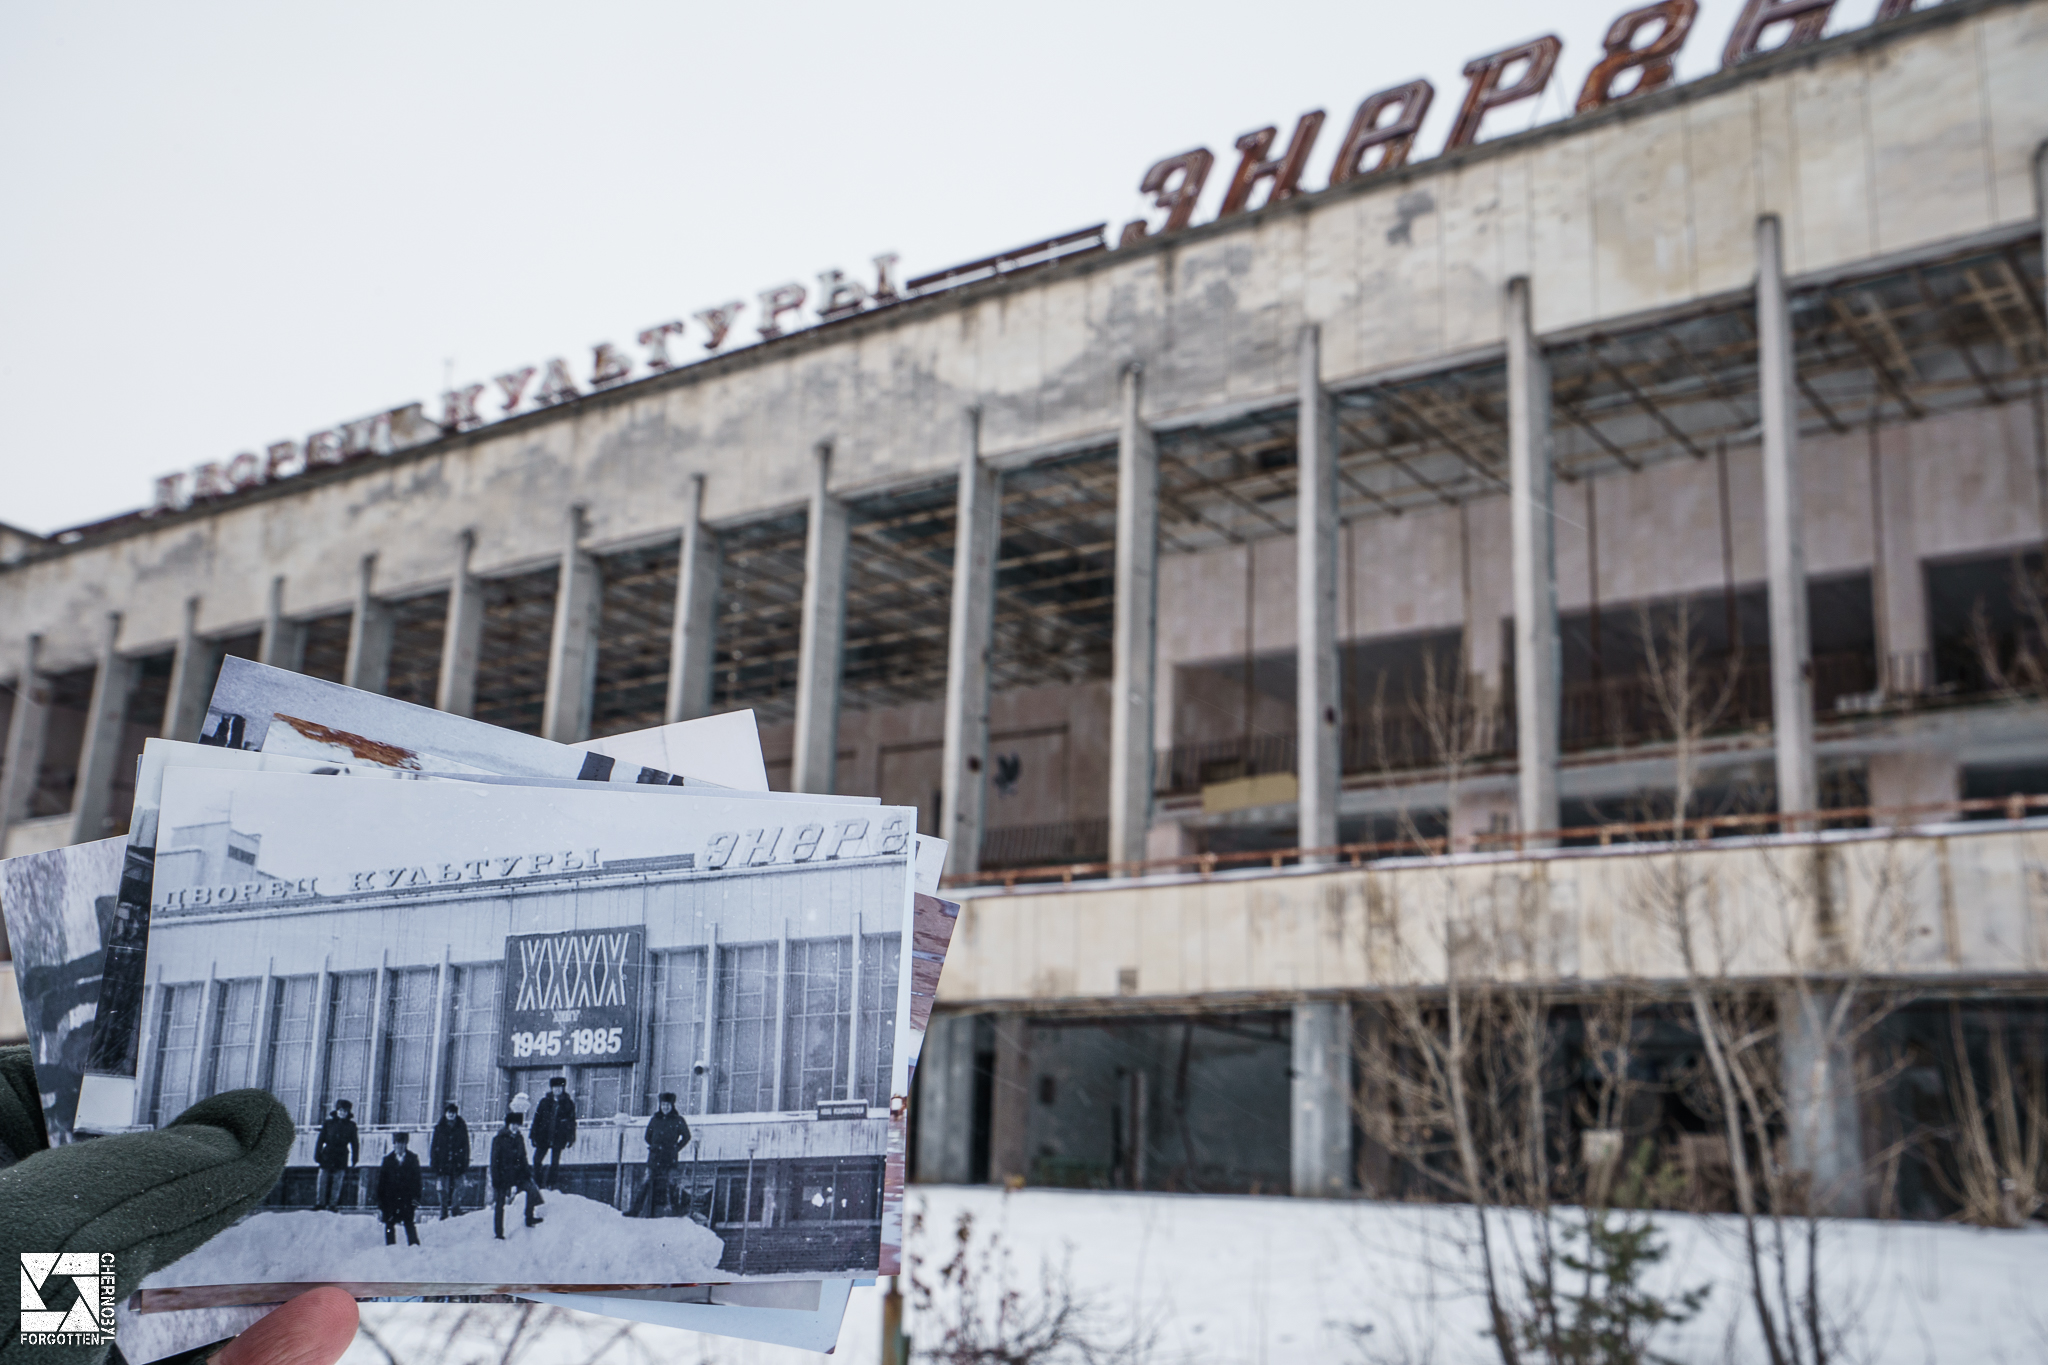 Chernobyl Then and Now Part 5 - Winter in Pripyat Before the accident